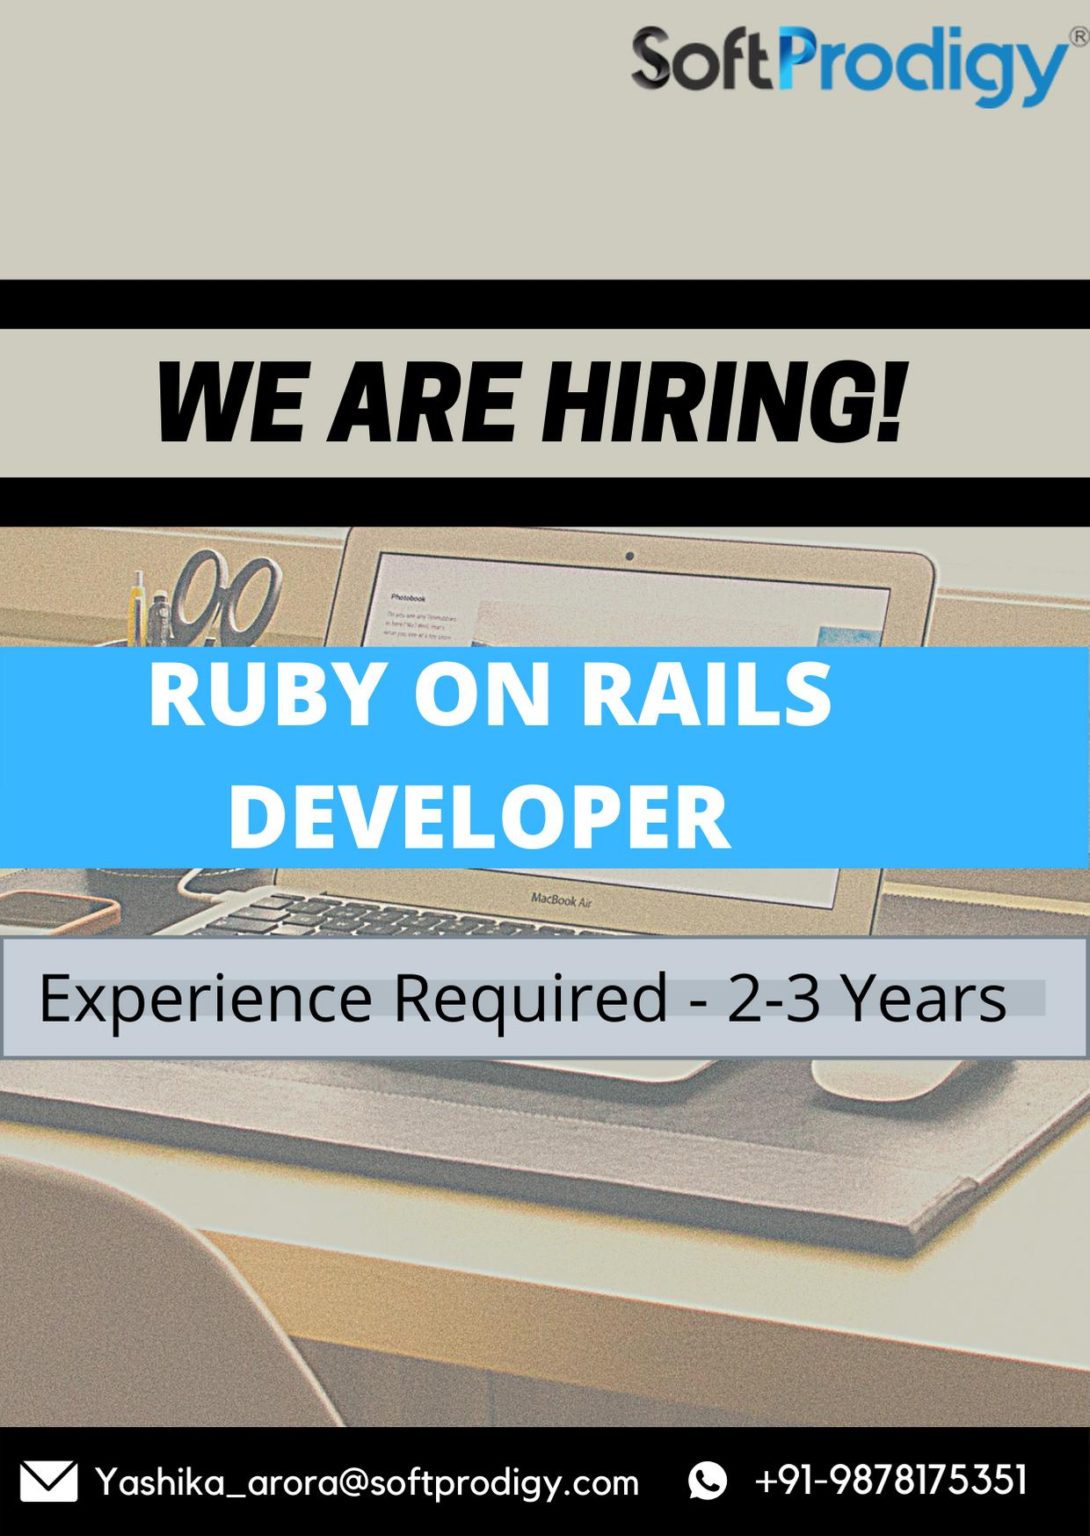 Ruby on rails jobs in bangalore 2012